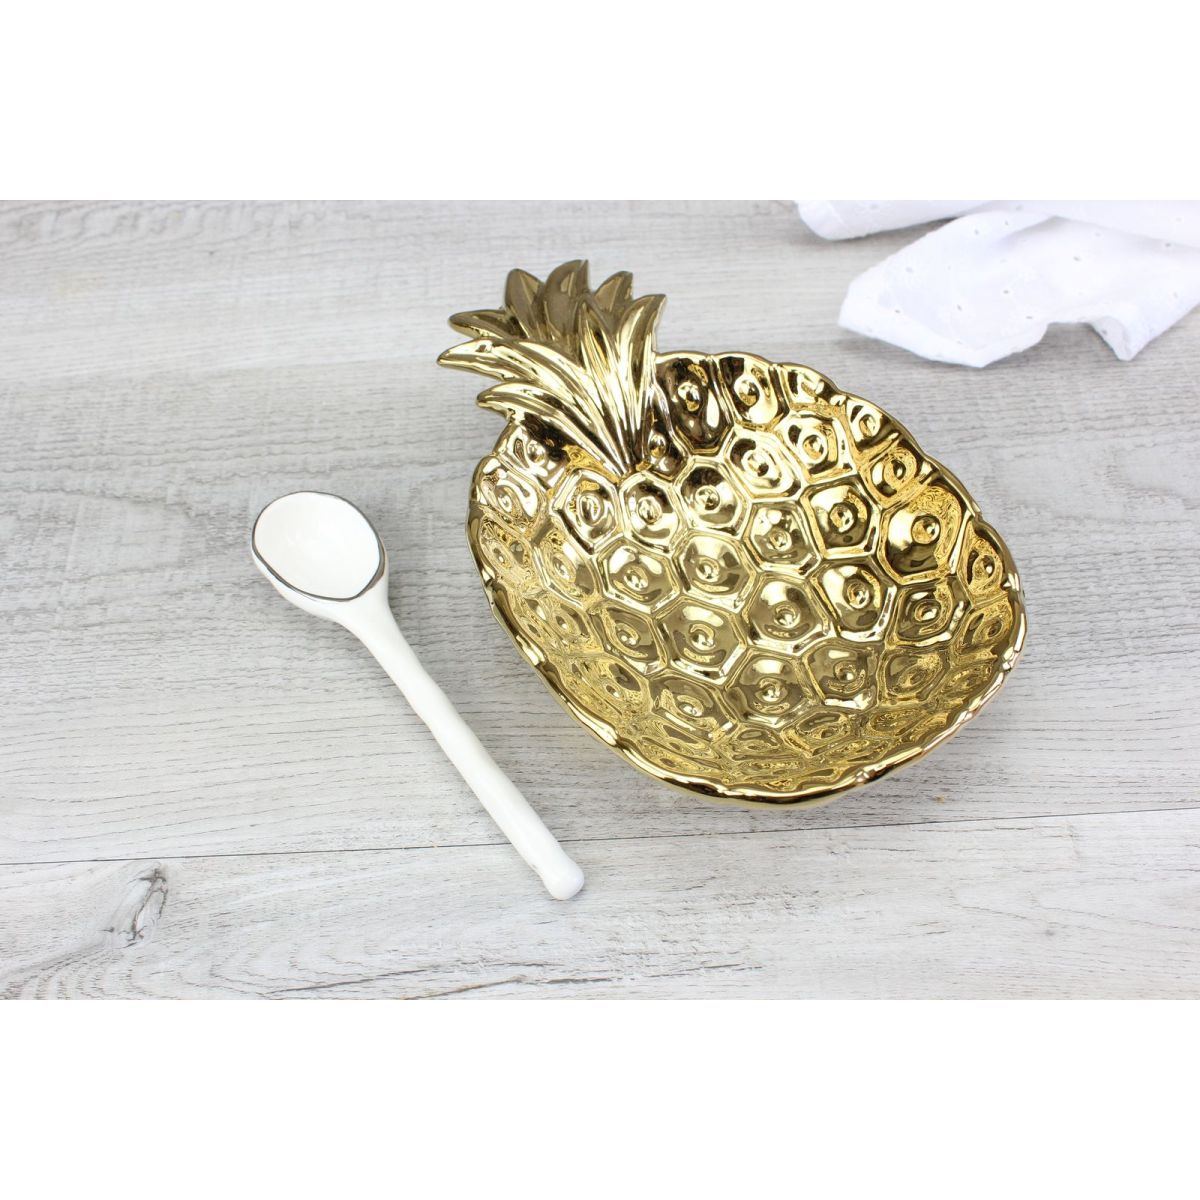 Pampa Bay Get Gifty - The Pineapple Procelain Set - Dish and Spoon